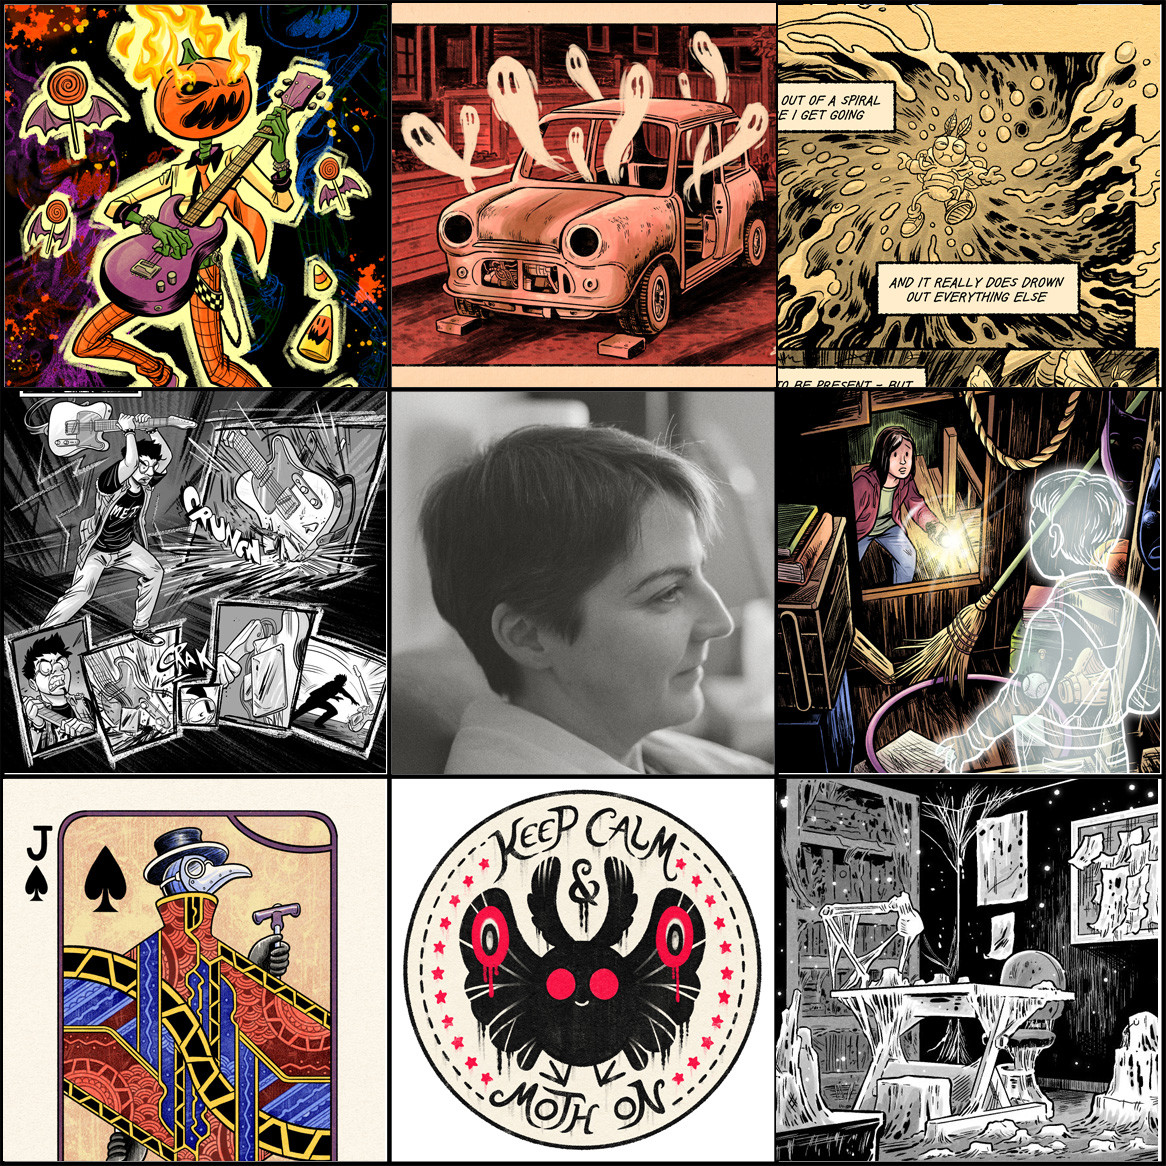 An "Art Vs. Artist" collage of OP surrounded by pieces of their artwork from the past year. Clockwise from top left: 1) a floating figure with a flaming Jack O' Lantern head playing a bass guitar, surrounded by floating monster candy 2) a hollowed-out car in a monochromatic red palette, with several ghosts drifting out, 3) a cartoon moth character underwater, struggling against a whirlpool current, 4) a young girl encountering a ghost boy in a dark room, 5) a drawing desk in a room with a bookcase, bulletin board, boxes piled on the floor and other objects - everything is covered in fungus and cobwebs, 6) a cute cartoon Mothman in a circle surrounded by the words "Keep Calm & Moth On," 7) a plague doctor drawn in the style of a Jack Of Spades playing card, and 8) a comic page showing a series of panels of a man smashing a Fender Telecaster guitar.